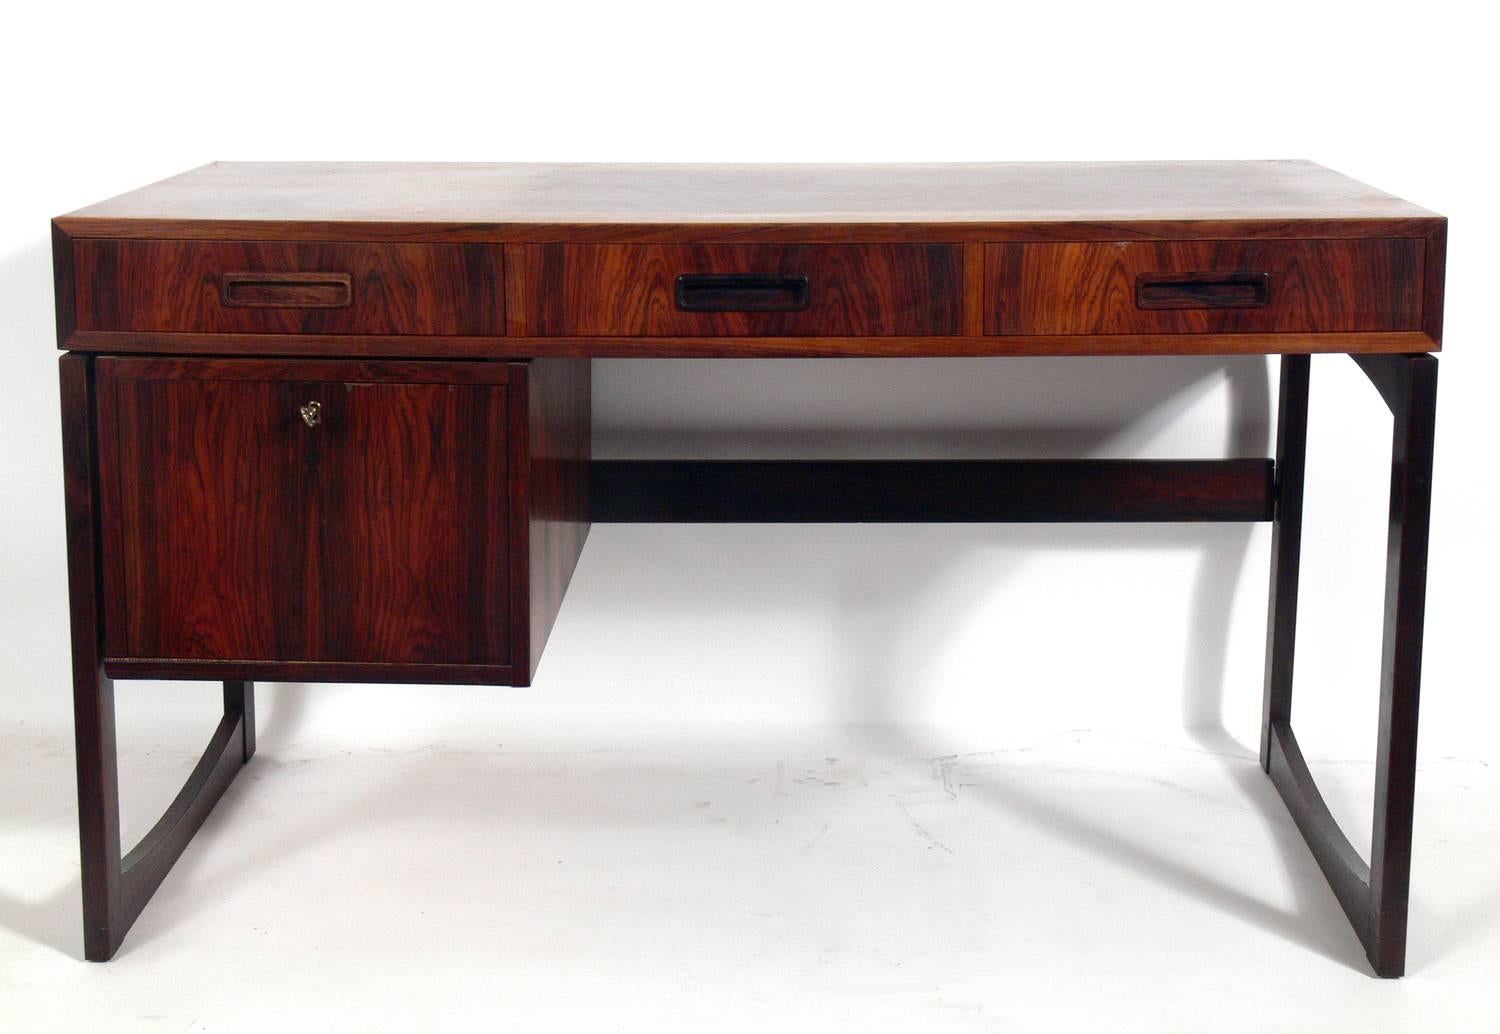 Danish modern rosewood desk, Denmark, circa 1960s. This piece is a versatile size and has a lot of storage for a small footprint. There are three deep drawers at the top and one large file drawer at the lower left. This piece is currently being